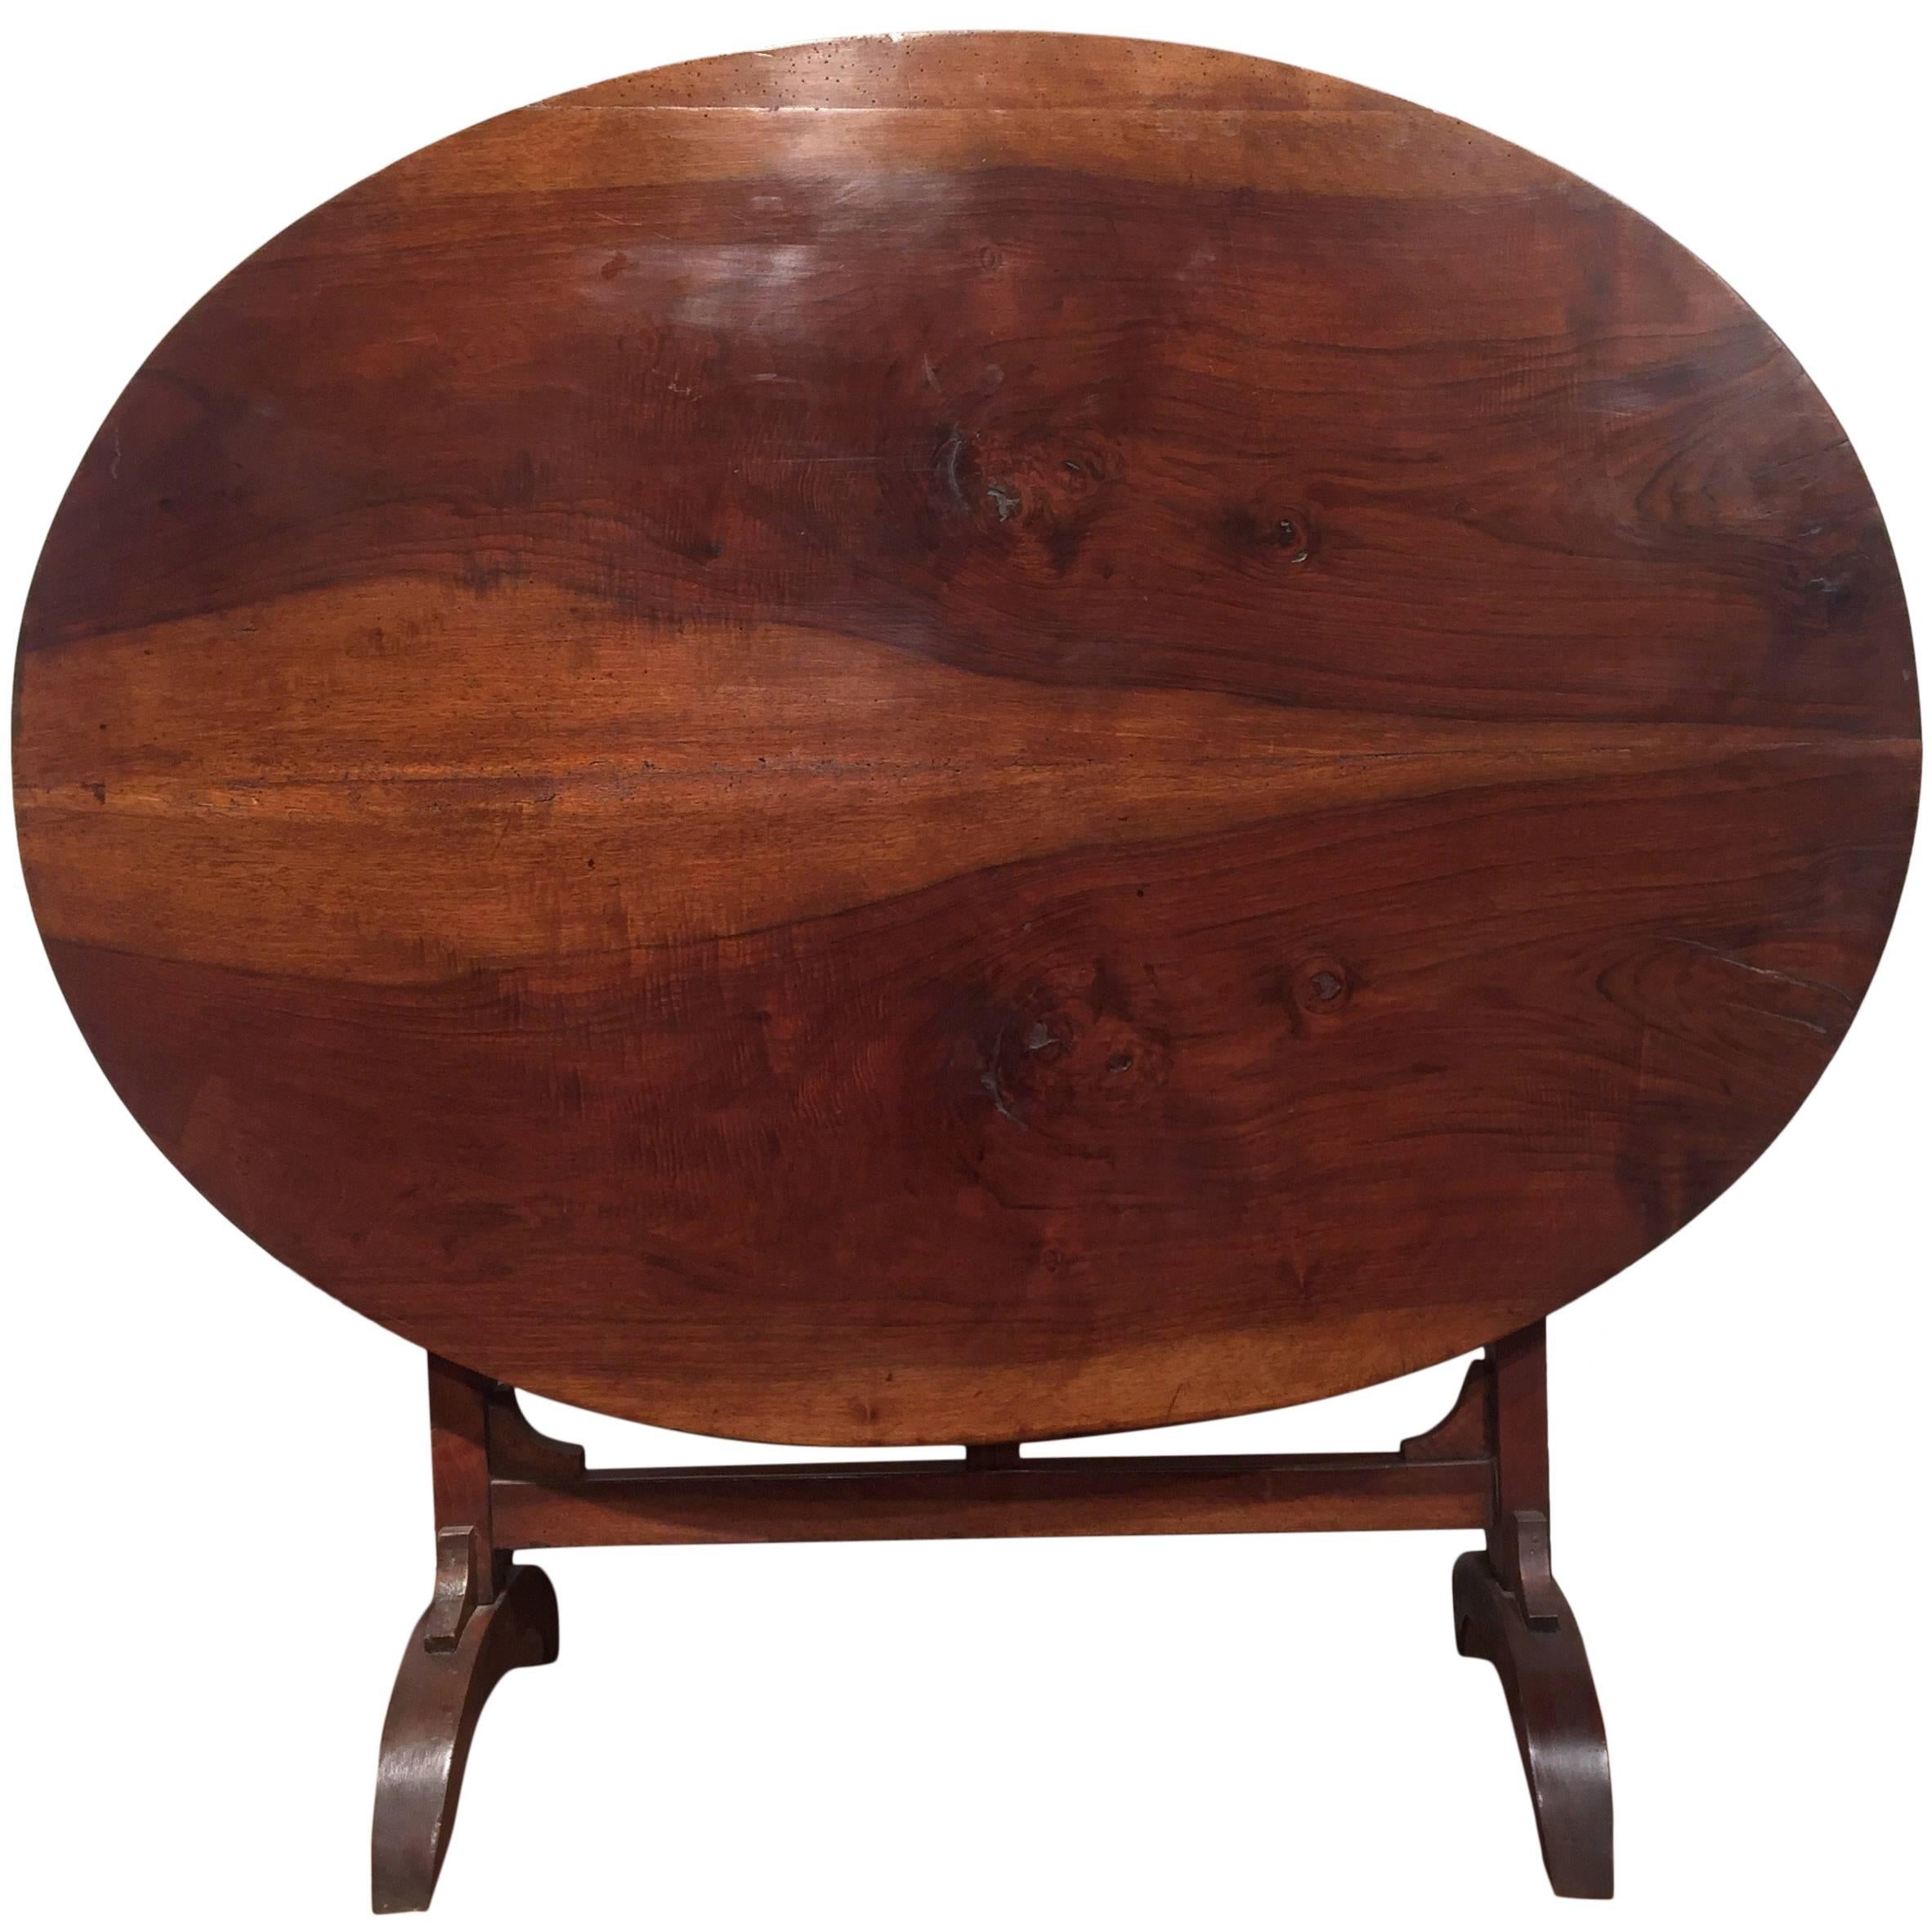 19th Century French Walnut Wine Tasting Table from Burgundy